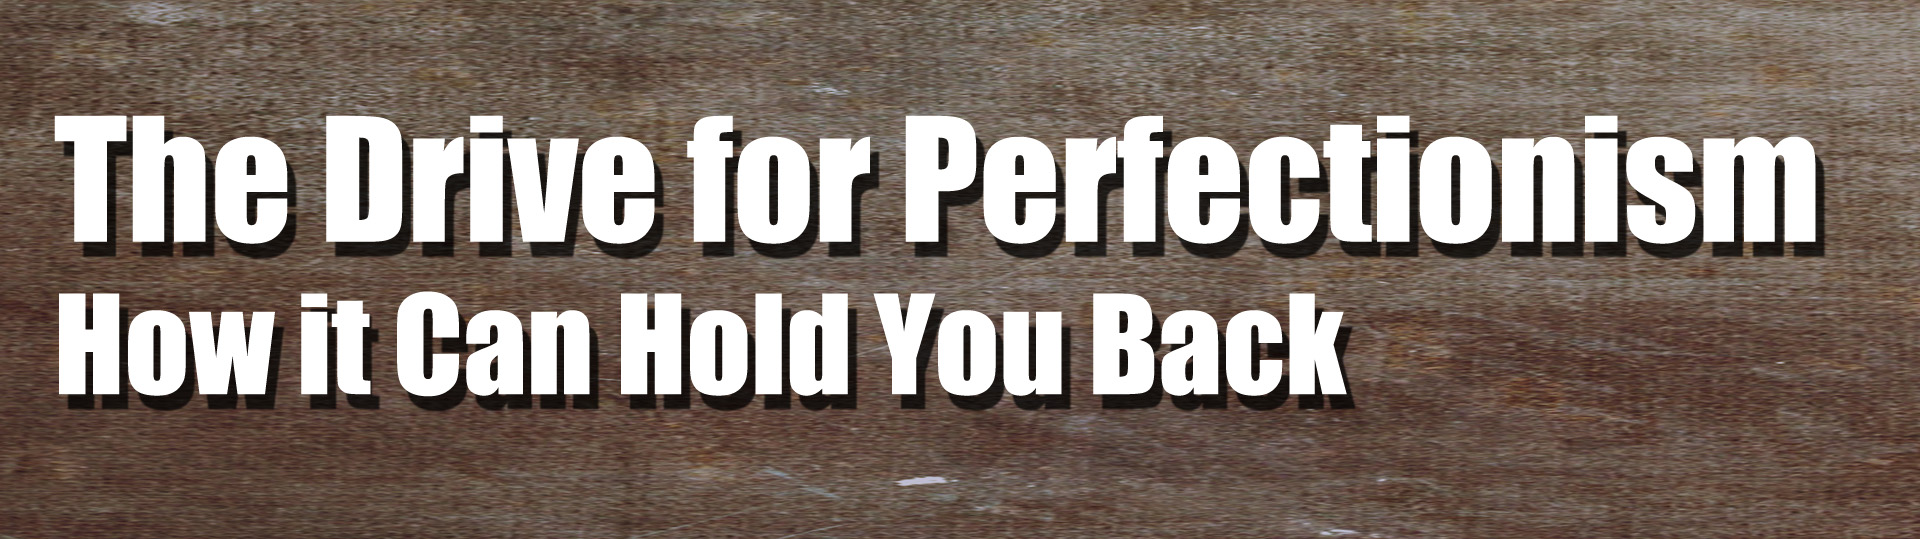 The Drive for Perfectionism